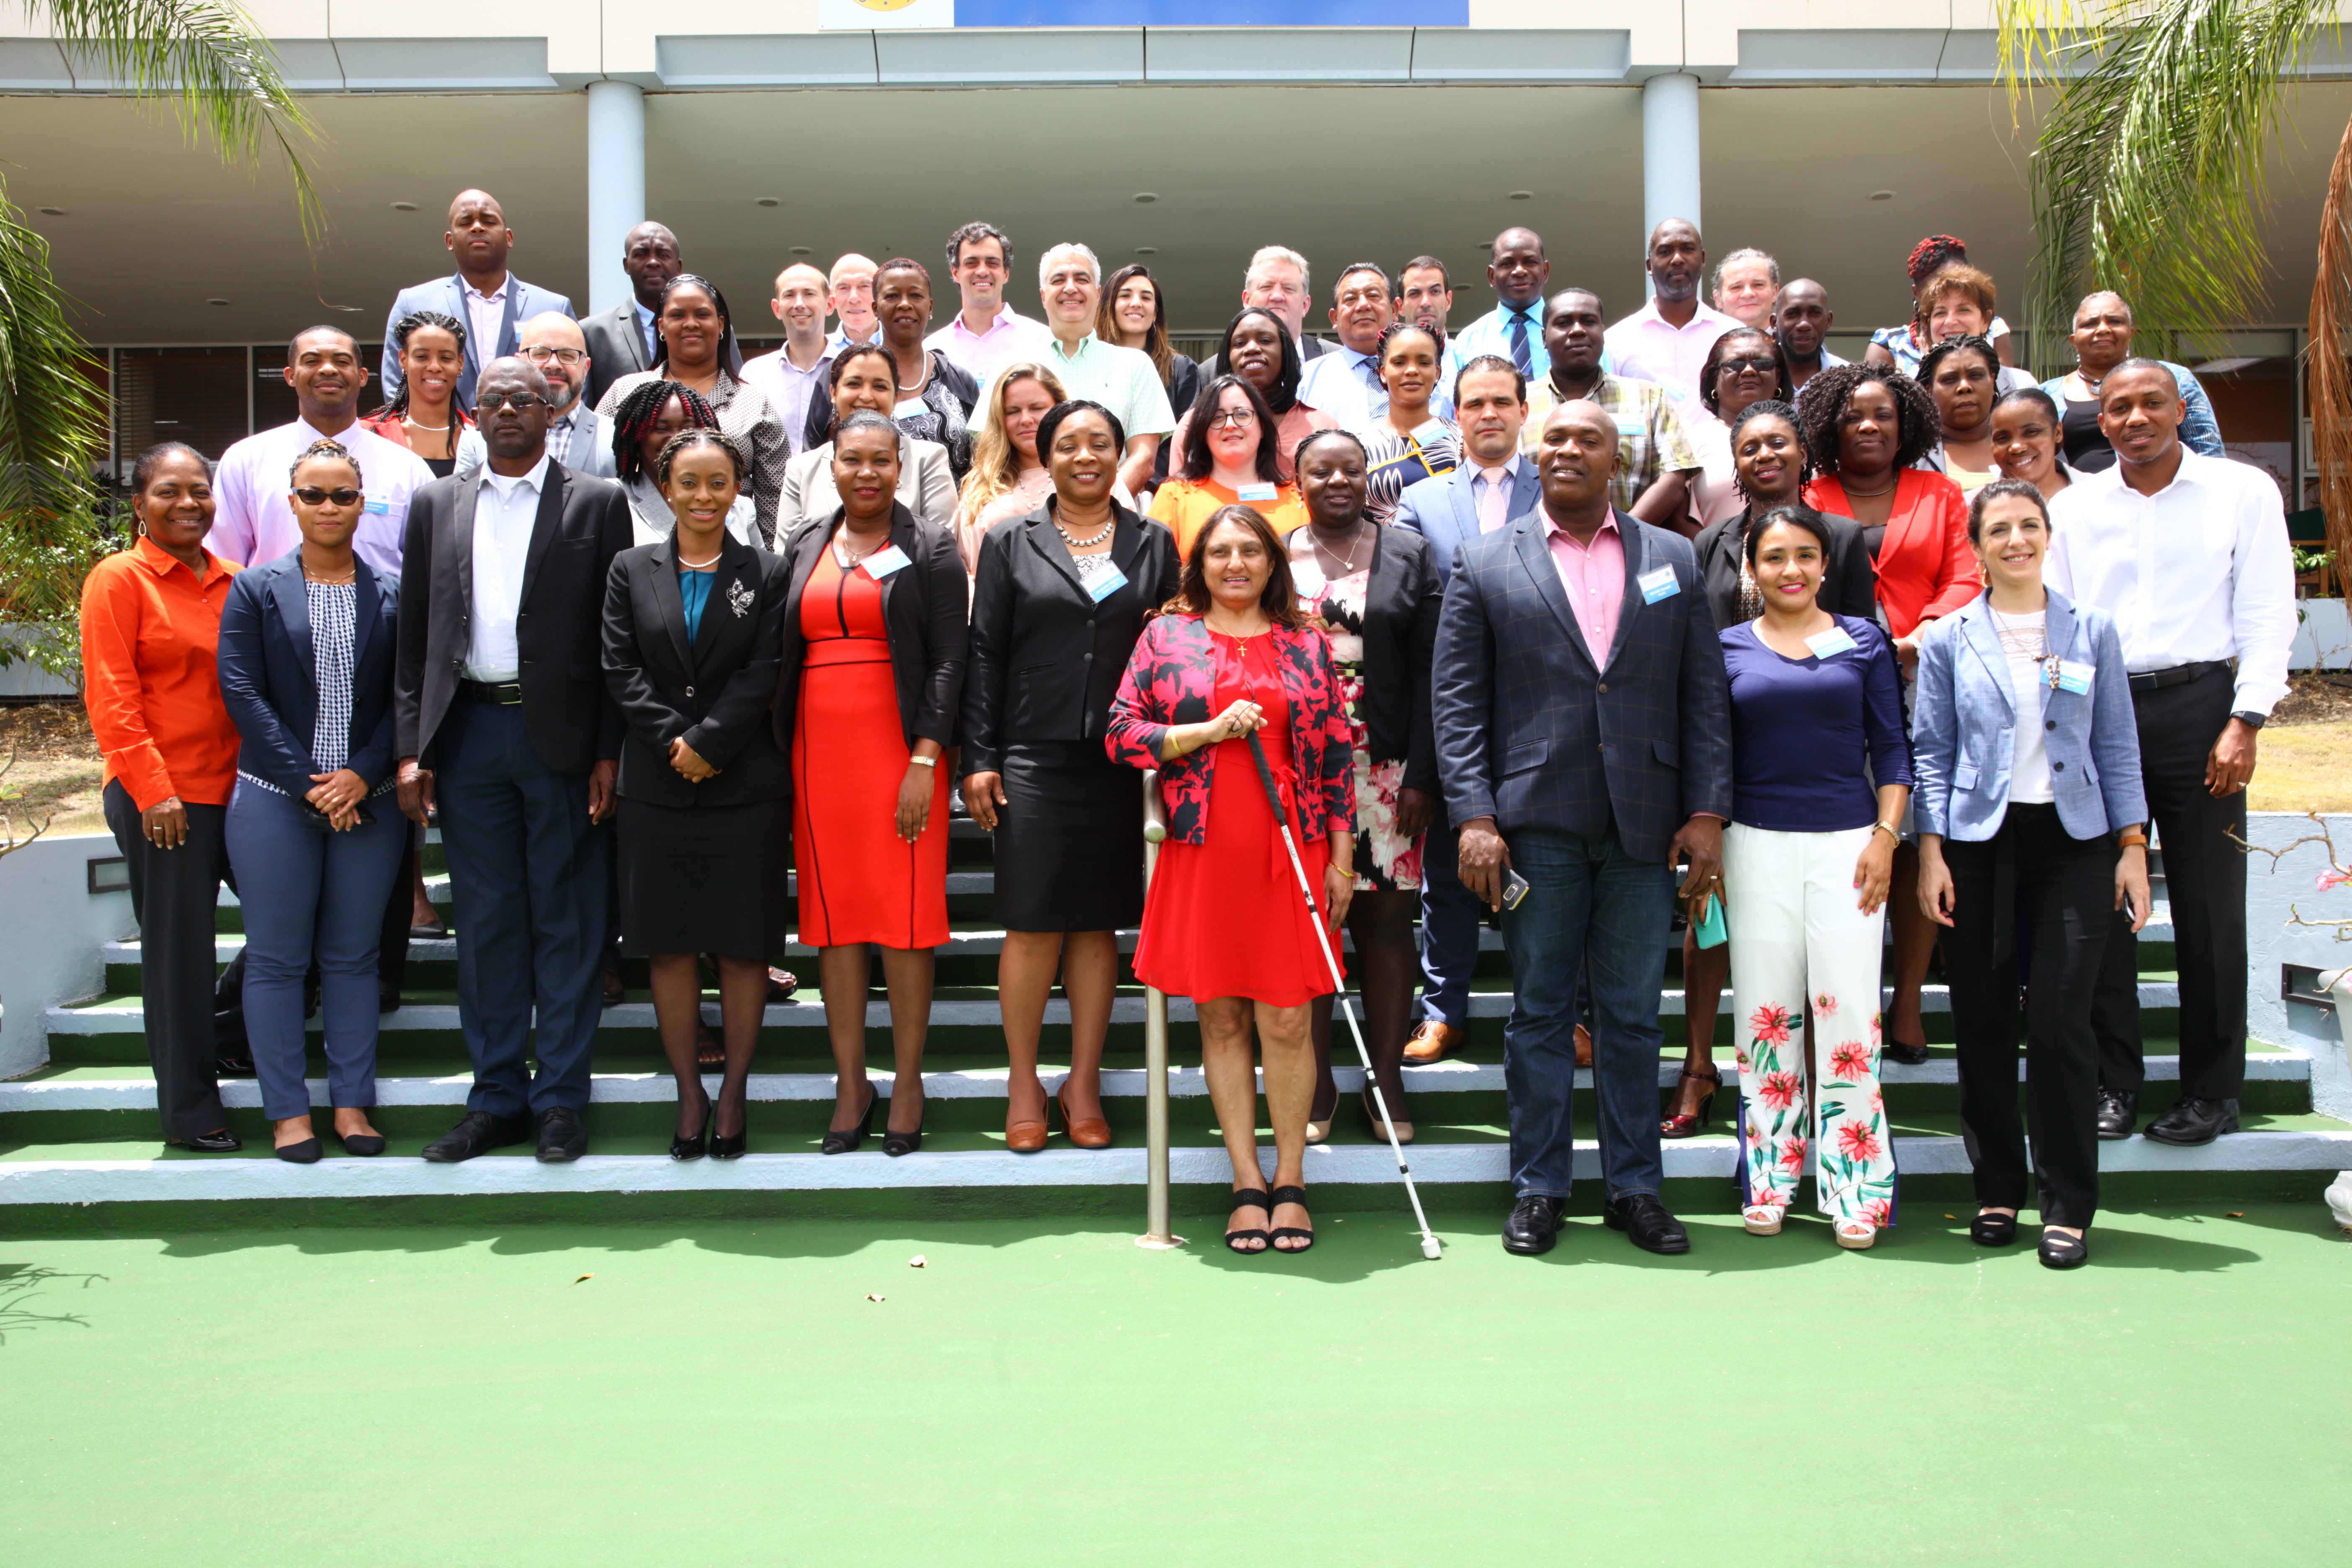 Participants of the Procurement in Emergency Situations Workshop gather for a group photo at the Caribbean Development Bank.